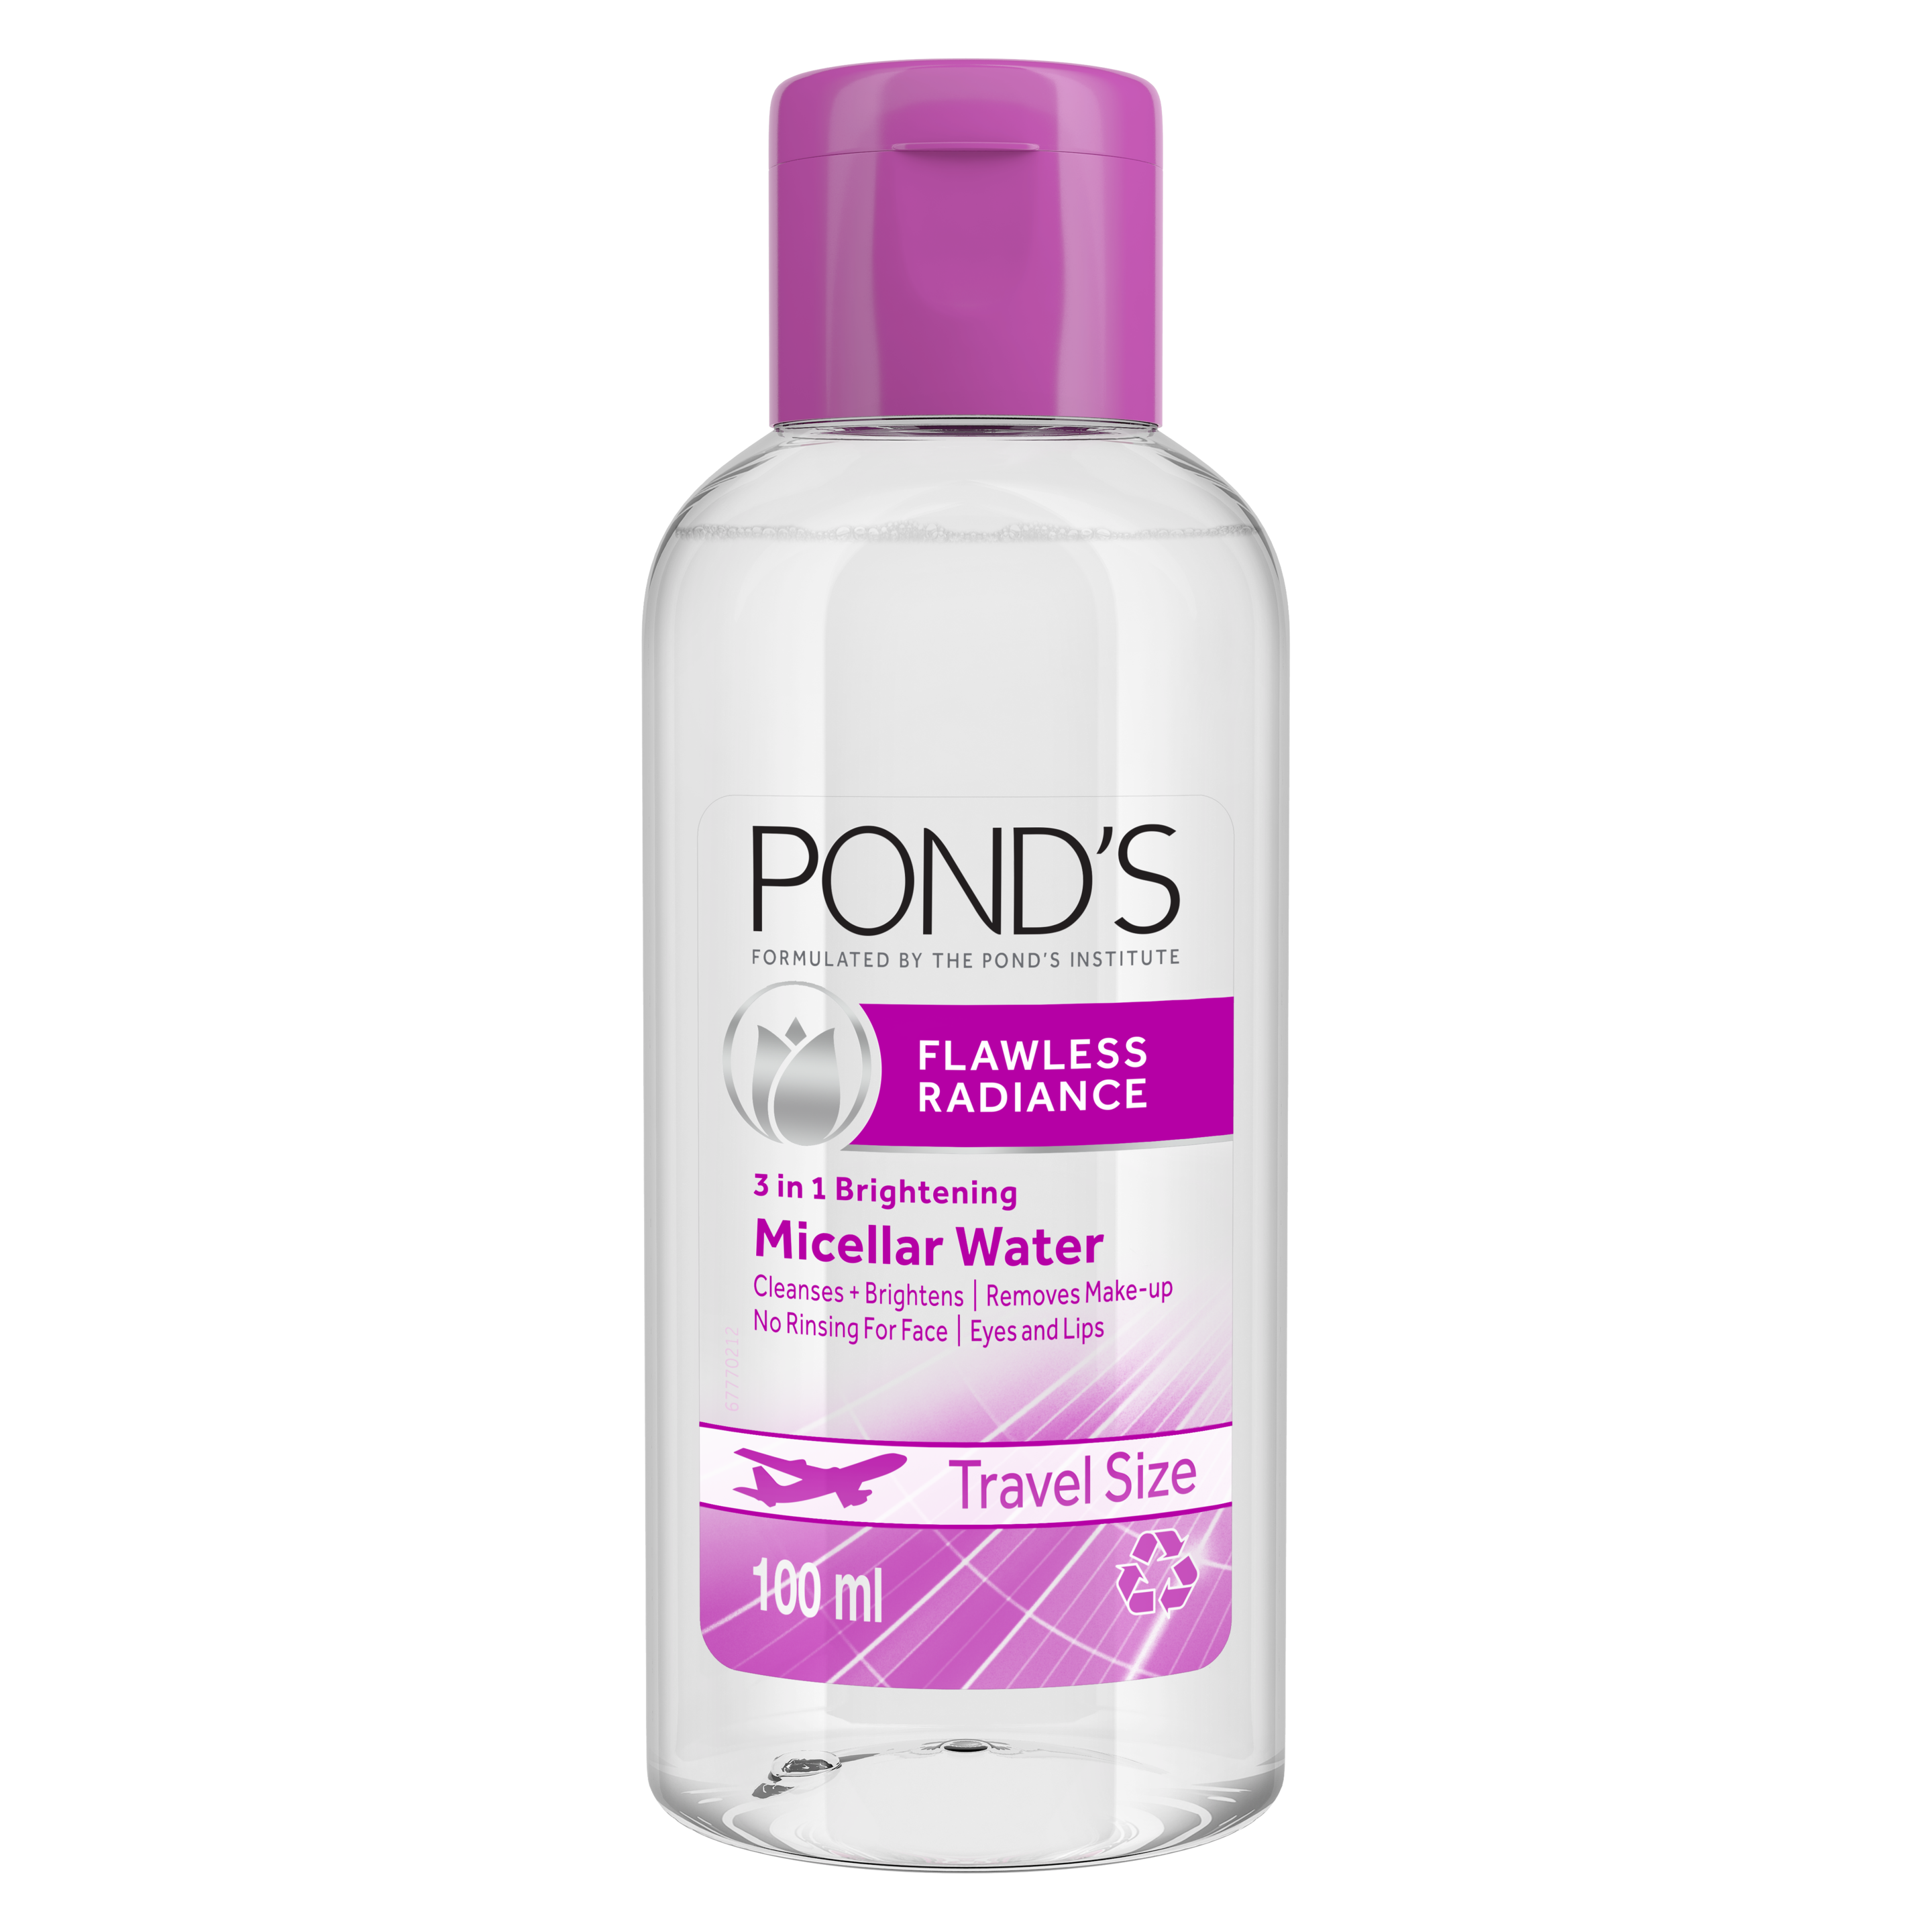 POND'S Flawless Radiance 3-in-1 Micellar Water Travel Size